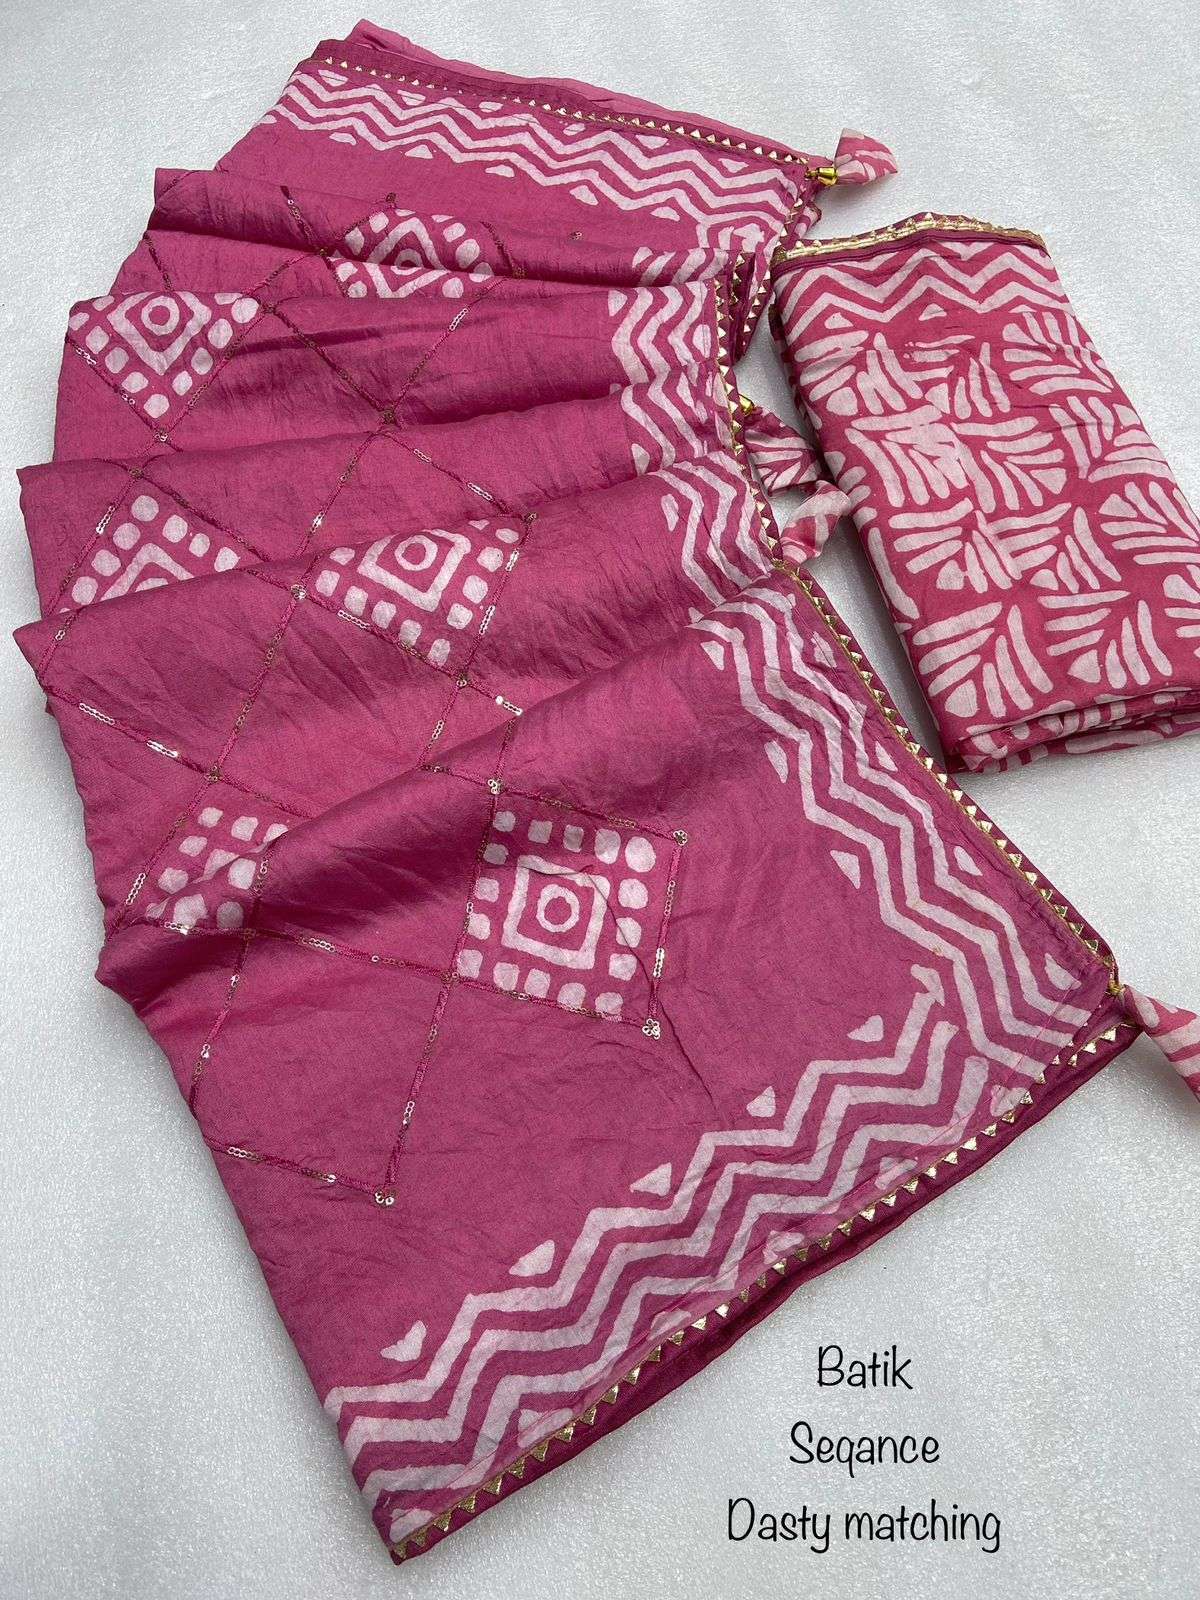 saree batik print sequence dasty colour matching batik print in cotton with sequence butta in all over saree with beautiful eye attractive batik print with gorgeous look latkan nd border